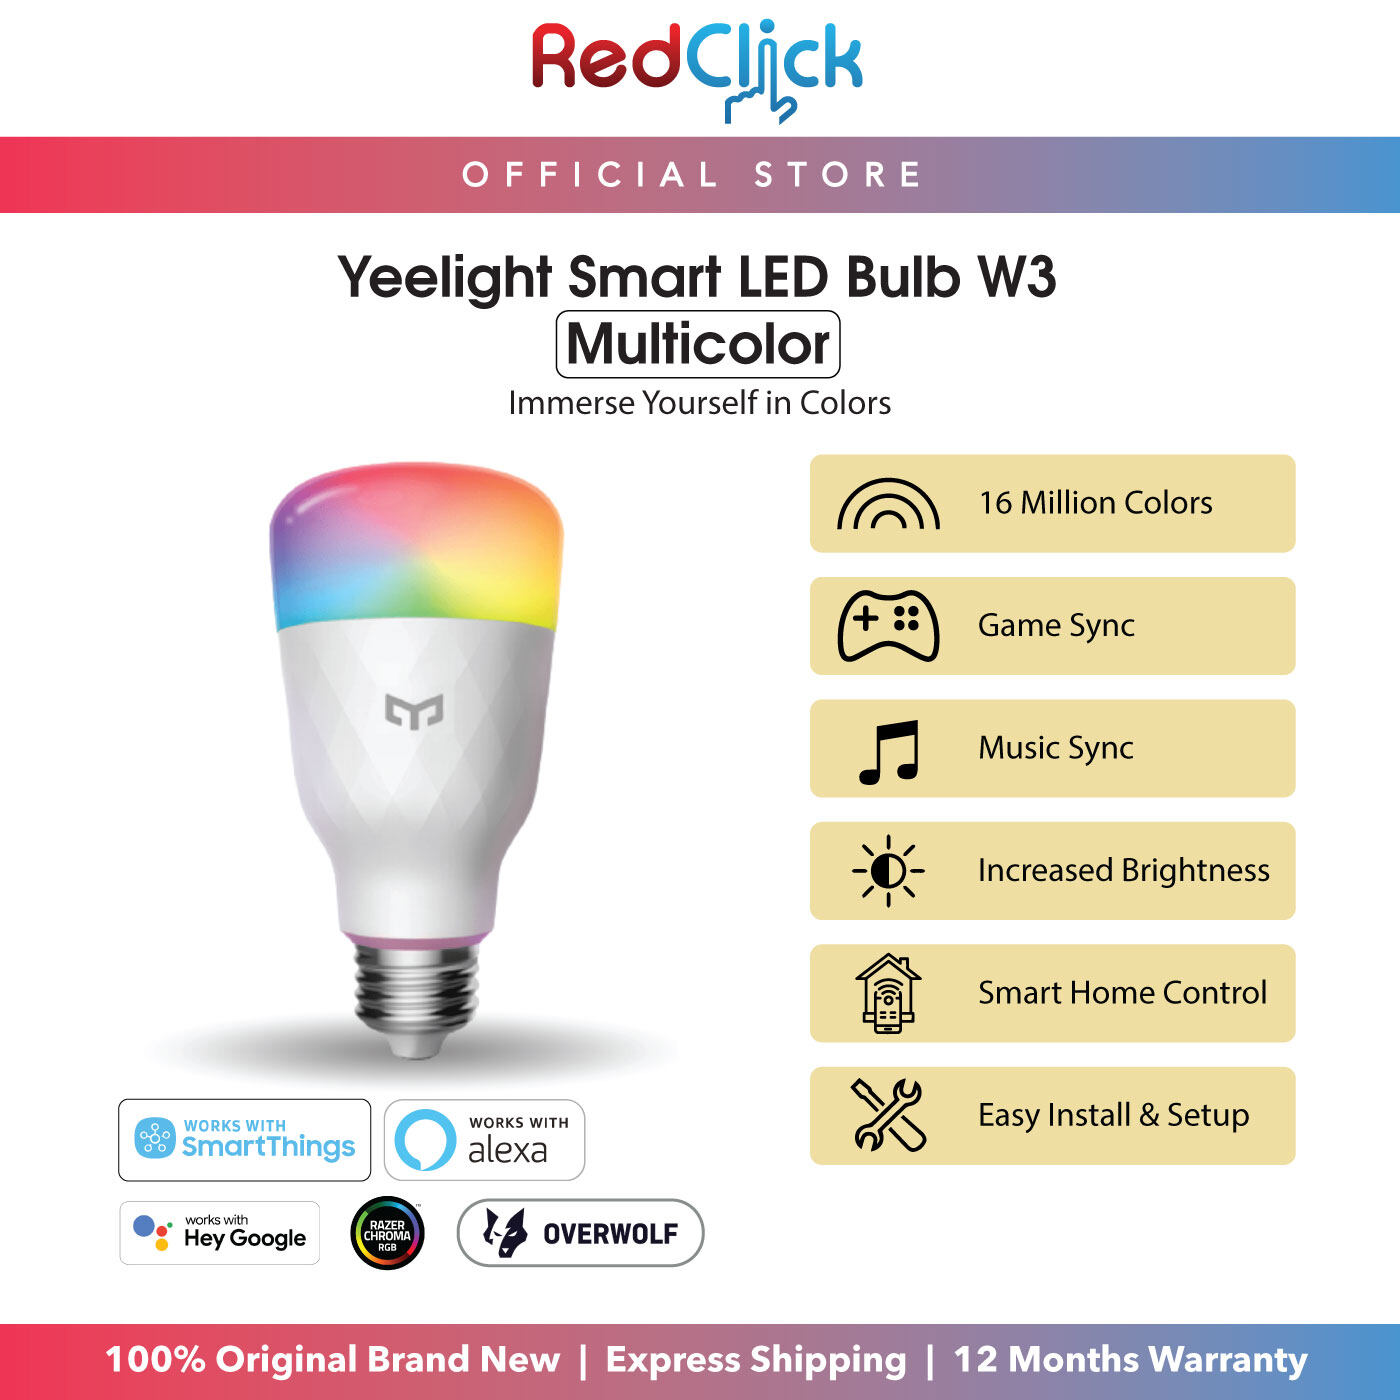 Yeelight Smart LED Bulb W3 Multicolor 16M Colors Game Sync Music Sync Work With Razer Chroma RGB Light Effects Easy Setup Support Home App Control